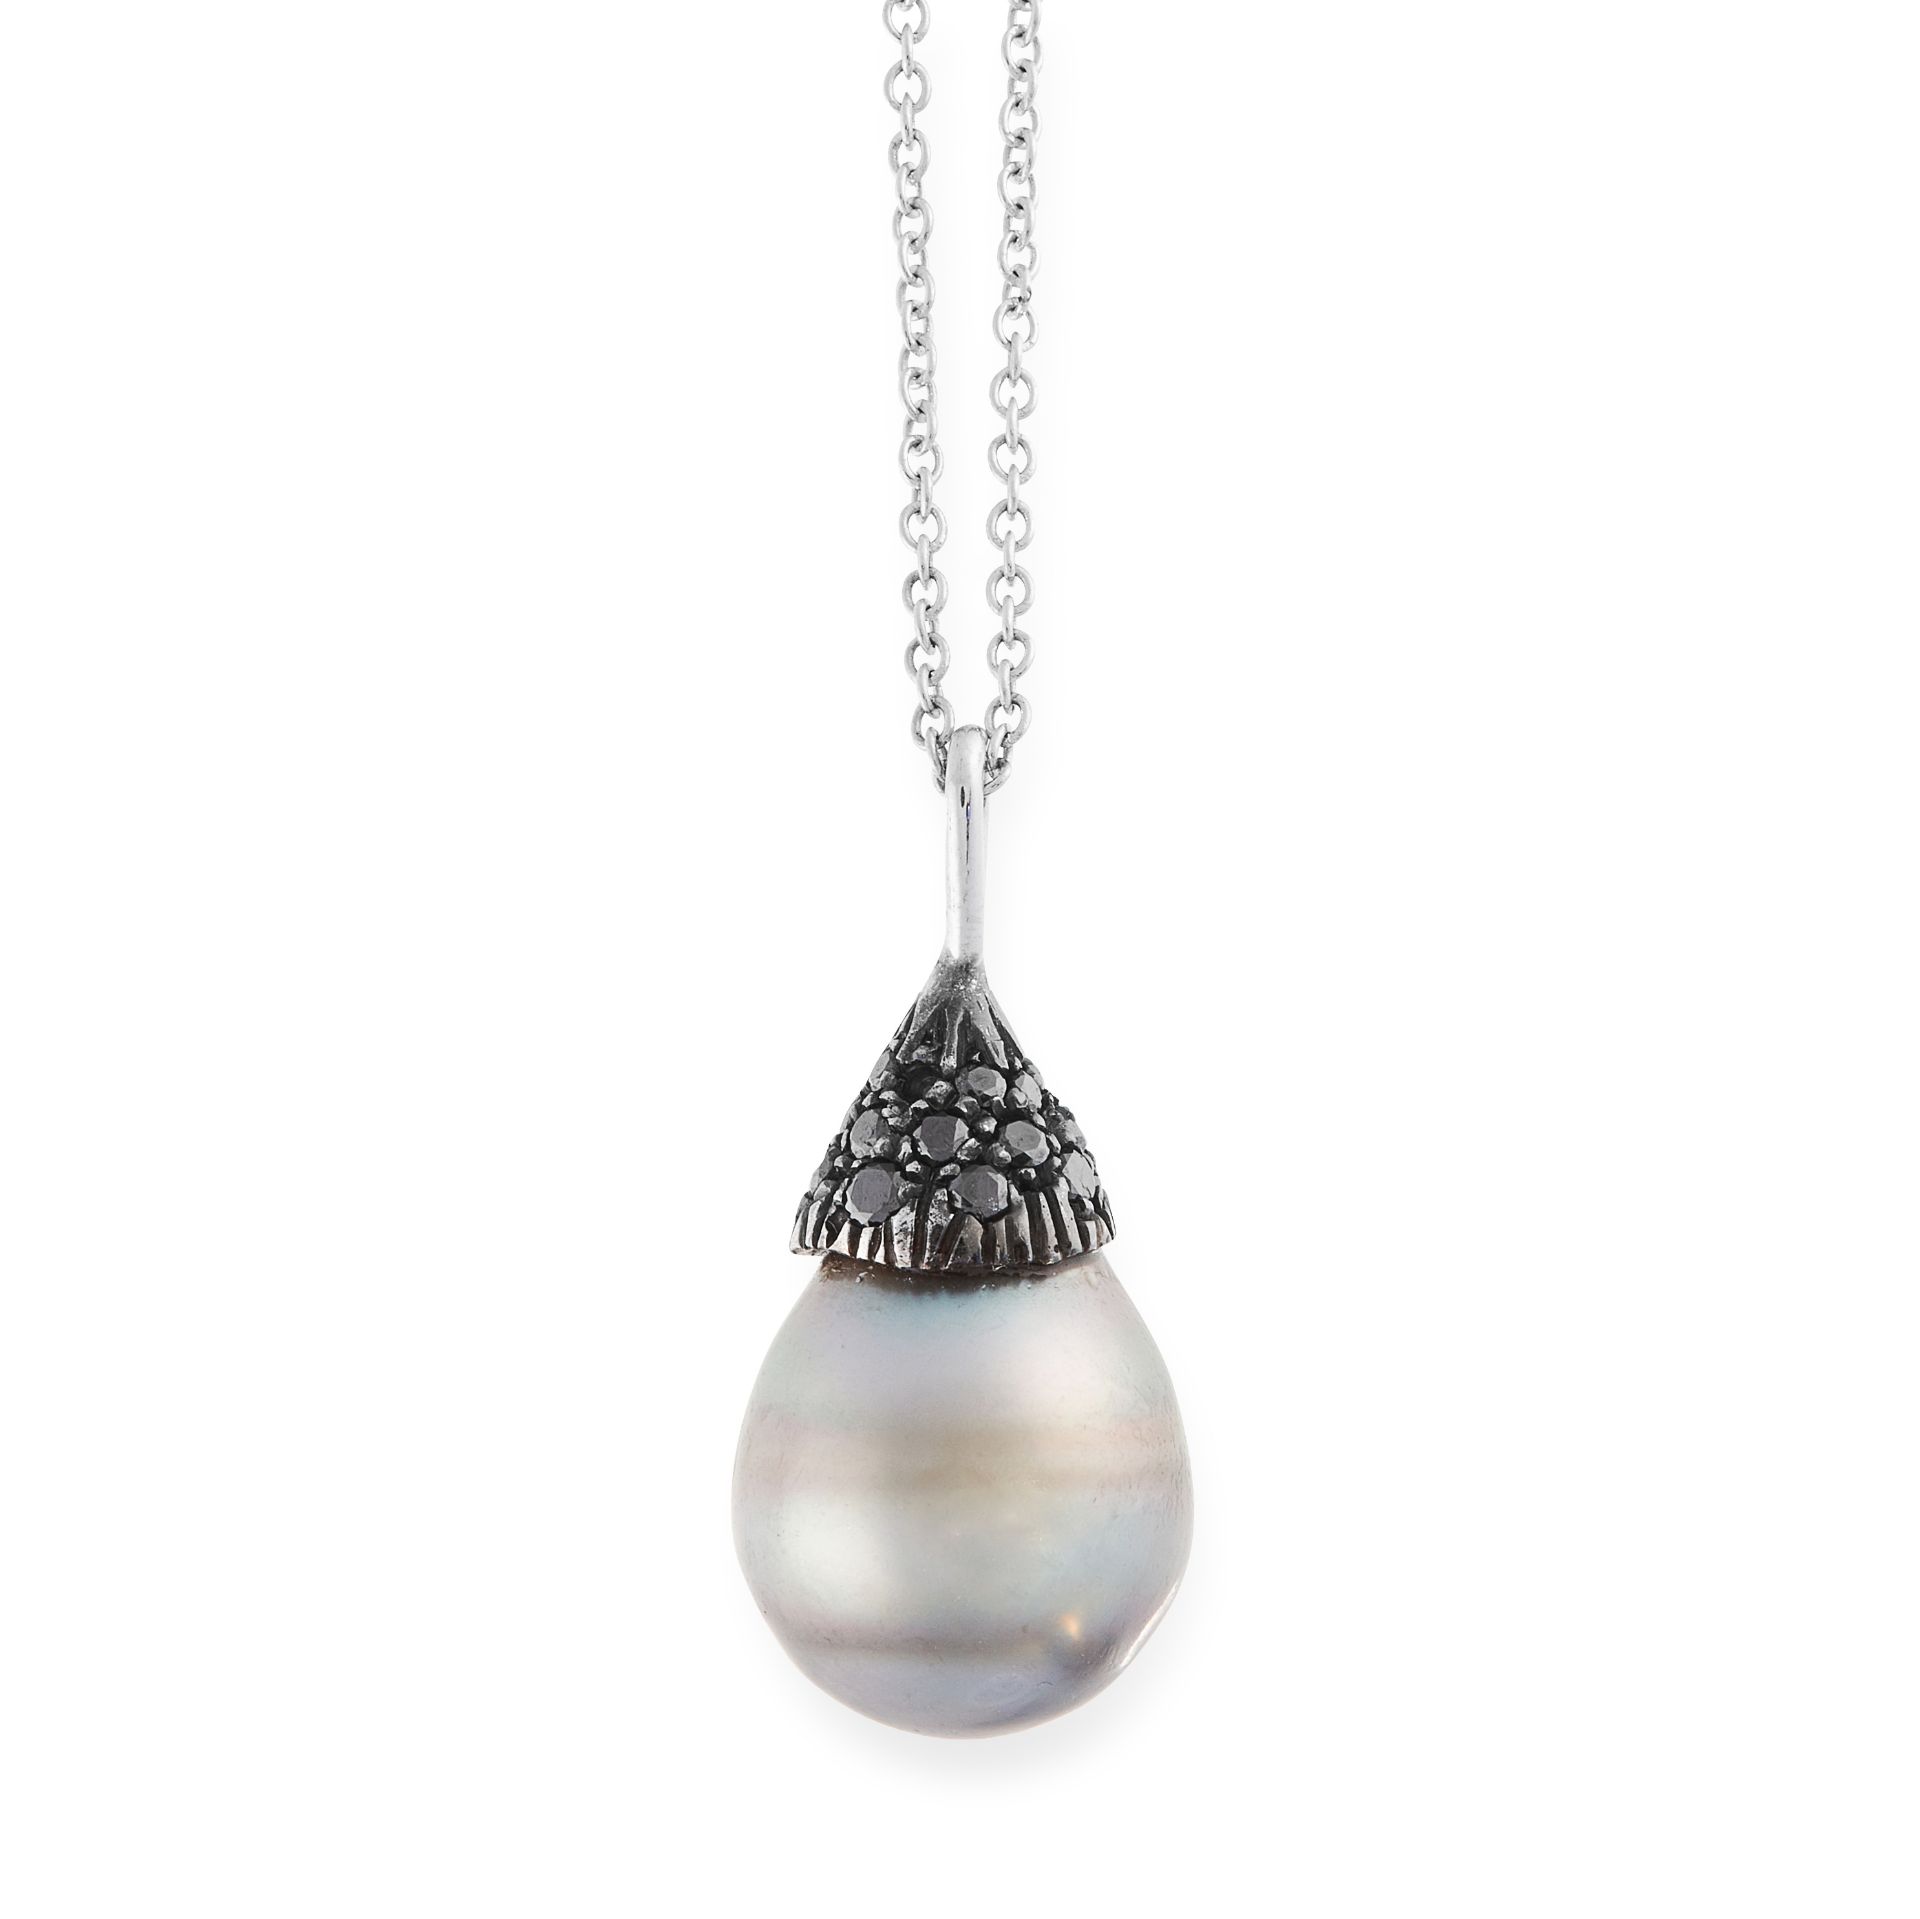 A BLACK PEARL AND BLACK DIAMOND PENDANT AND CHAIN in 18ct white gold, set with a black pearl and